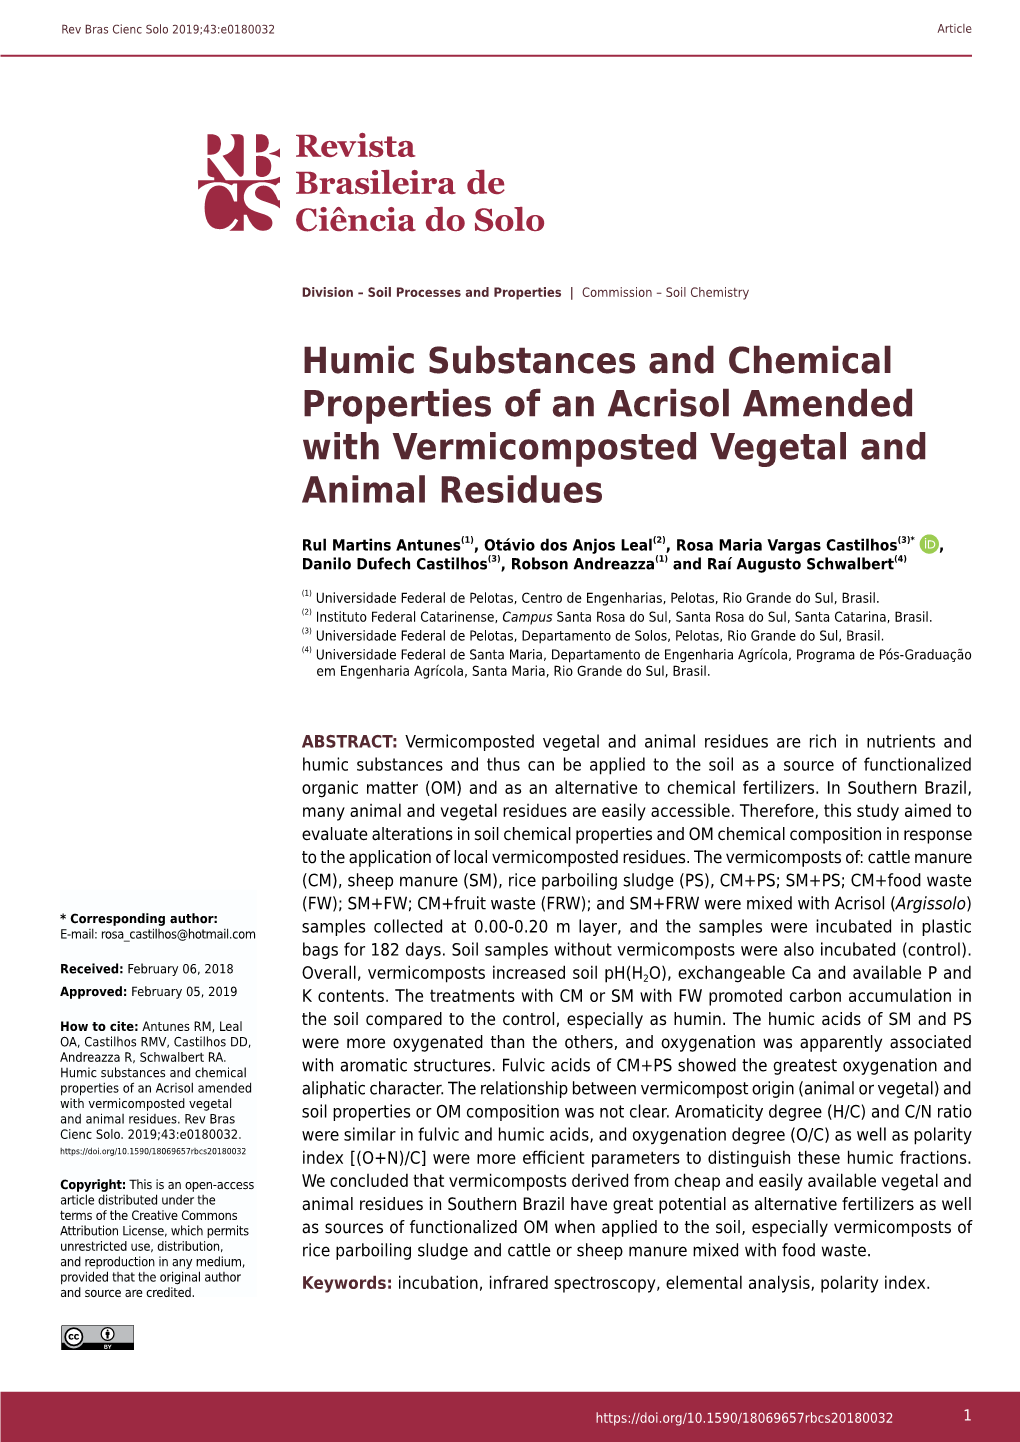 Humic Substances and Chemical Properties of an Acrisol Amended with Vermicomposted Vegetal and Animal Residues